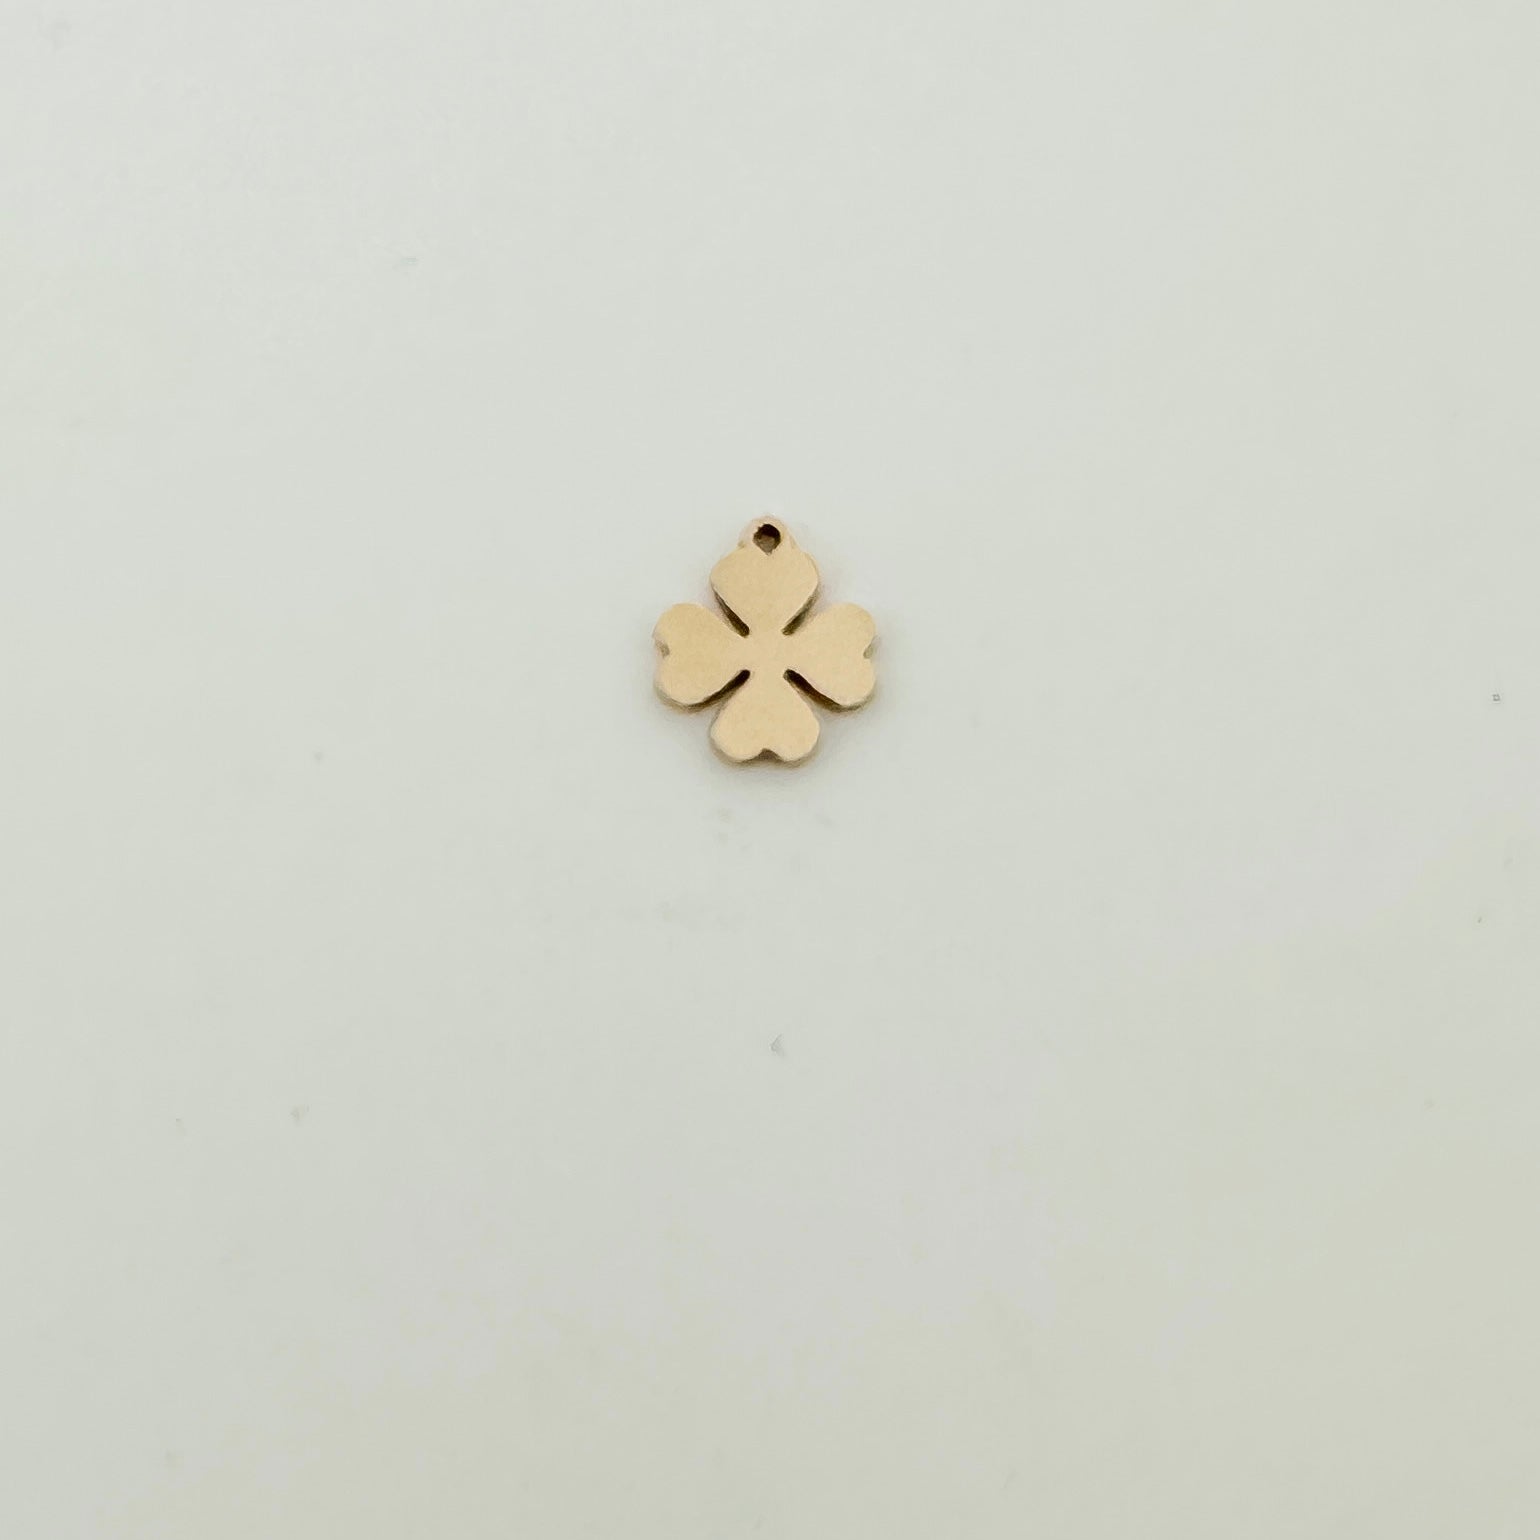 clover connector, gold filled clover charm, gold filled clover connector, st. patrick's day charm, gold filled charms, permanent jewelry connectors